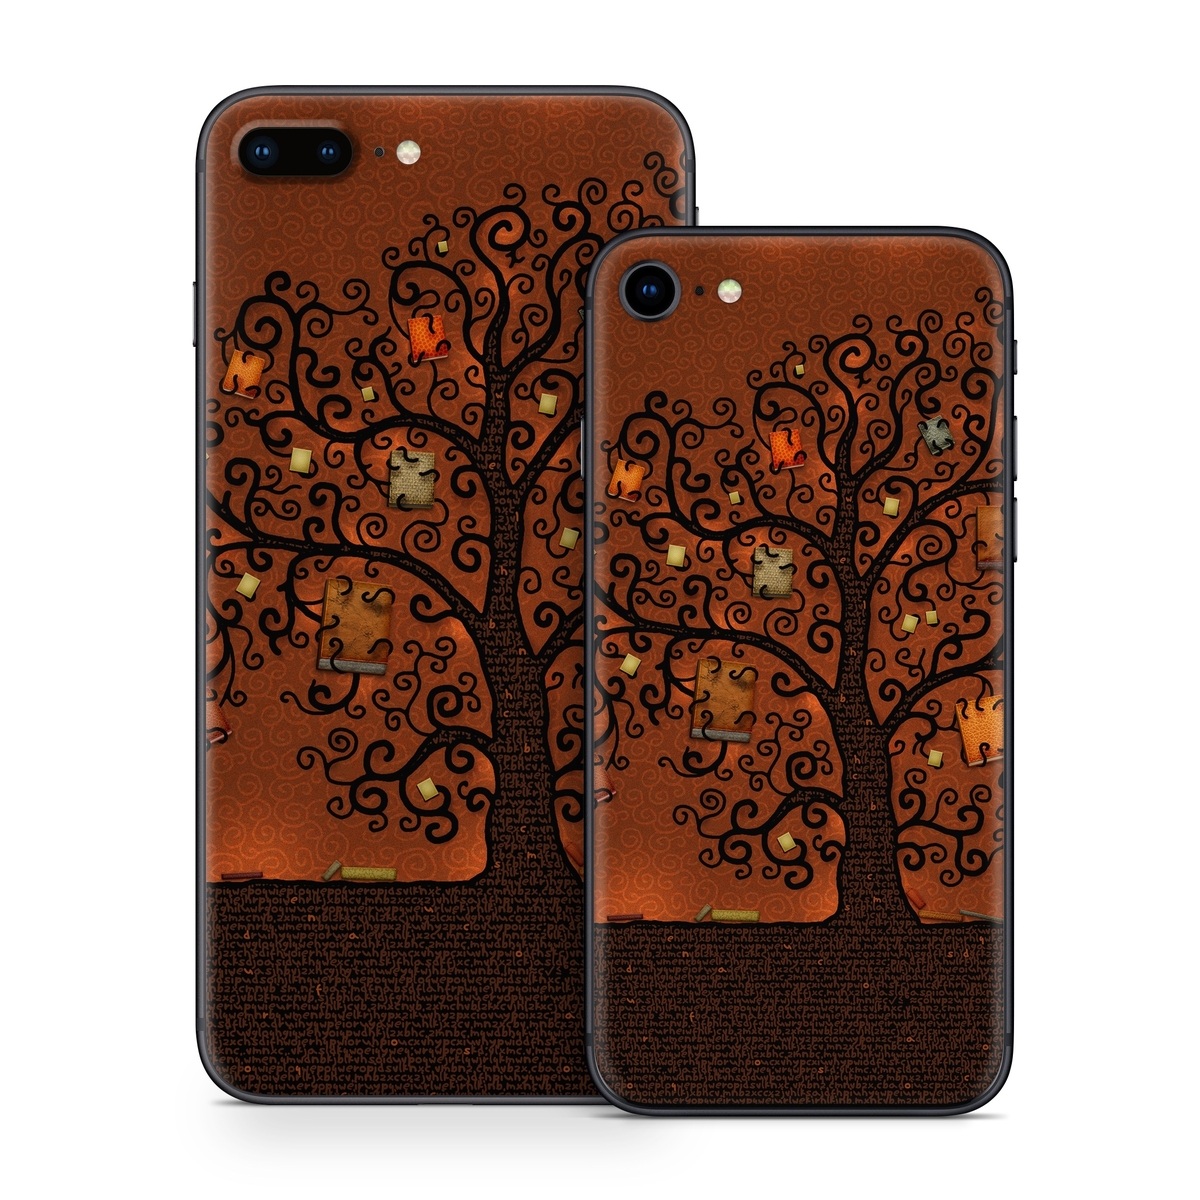 iPhone 8 Series Skin design of Tree, Brown, Leaf, Plant, Woody plant, Branch, Visual arts, Font, Pattern, Art, with black colors